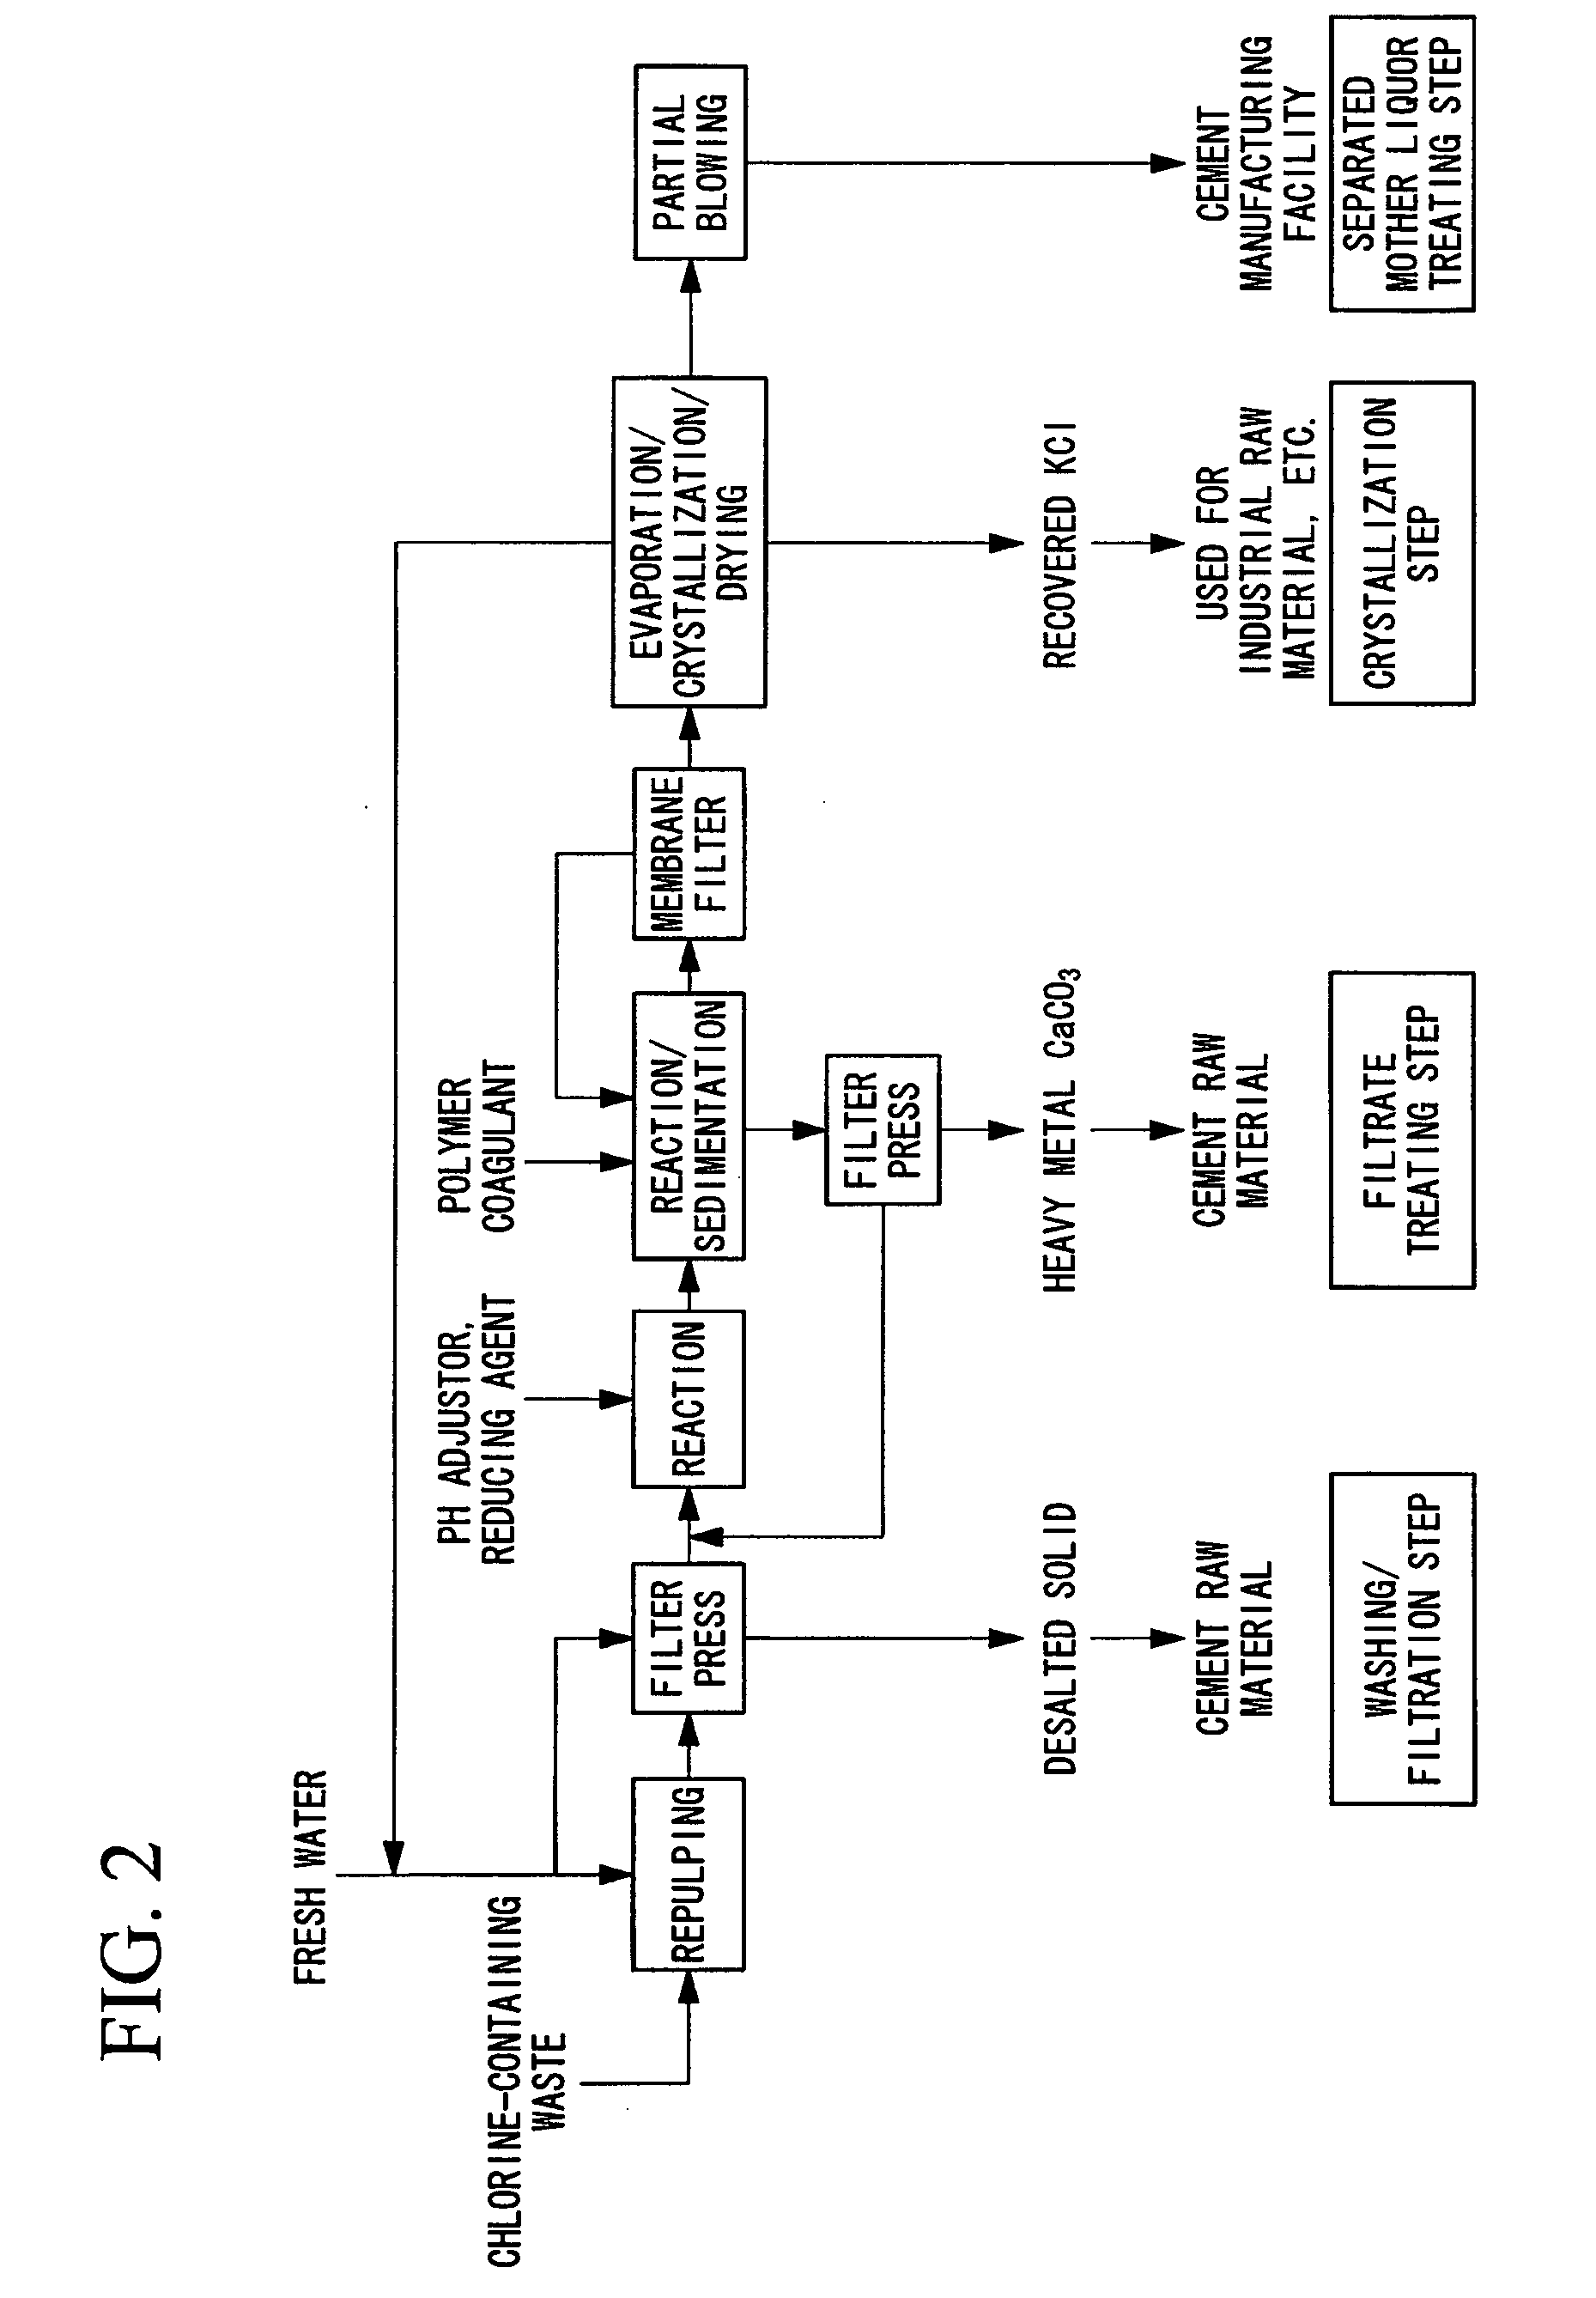 Method of and Apparatus for Treating Chlorine-Containing Waste